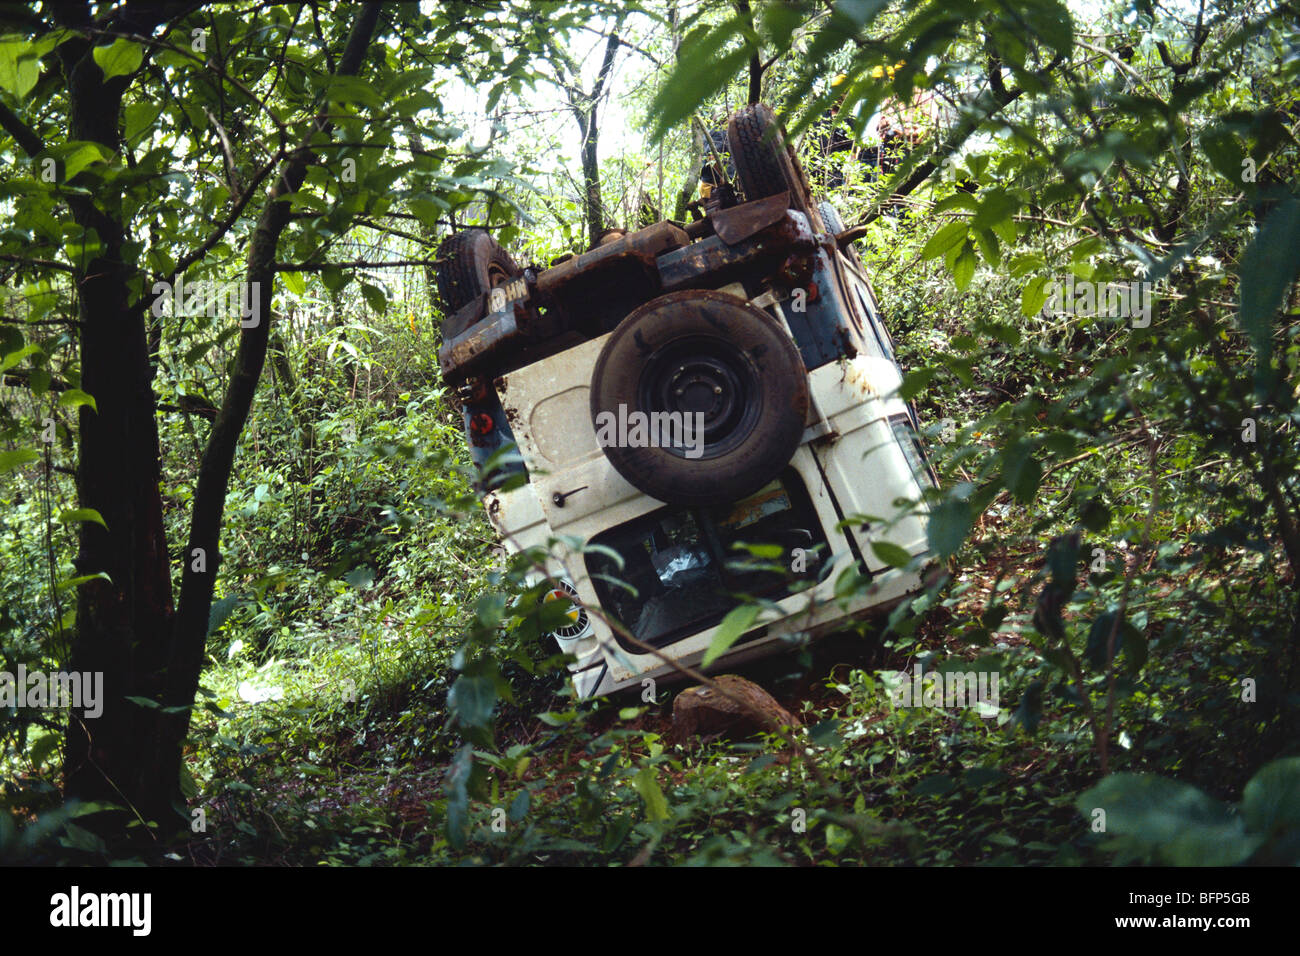 Jeep upside down ; jeep accident ; jeep turned turtle ; India ; asia Stock Photo